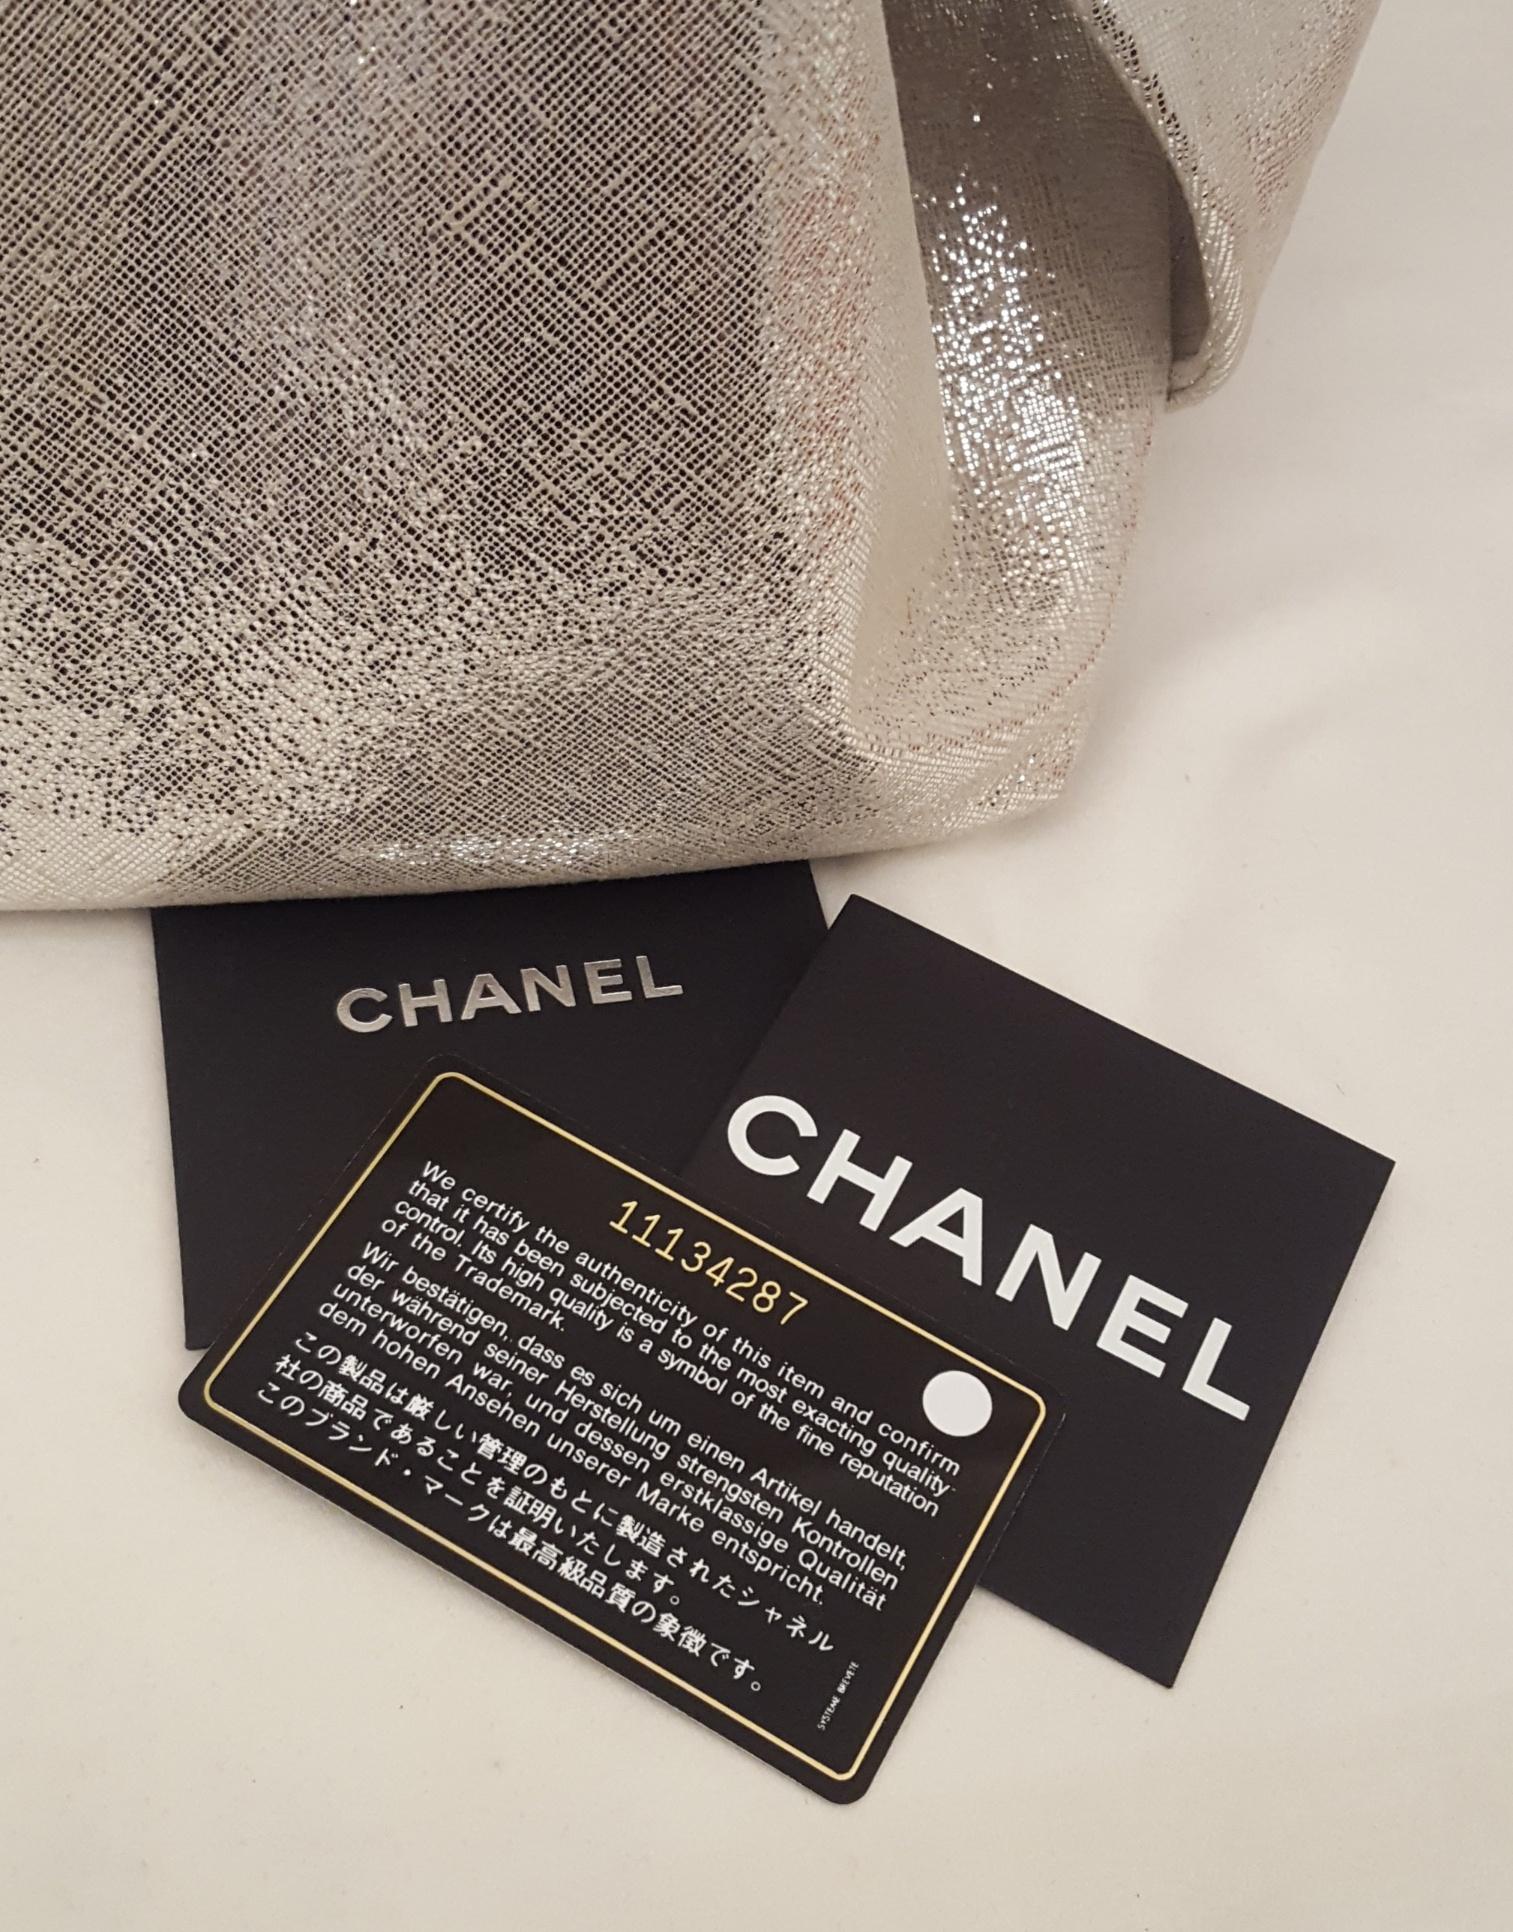 Chanel Champagne Color  Metallic Lame Mini Hobo Bag with Two Flaps for Closure 3